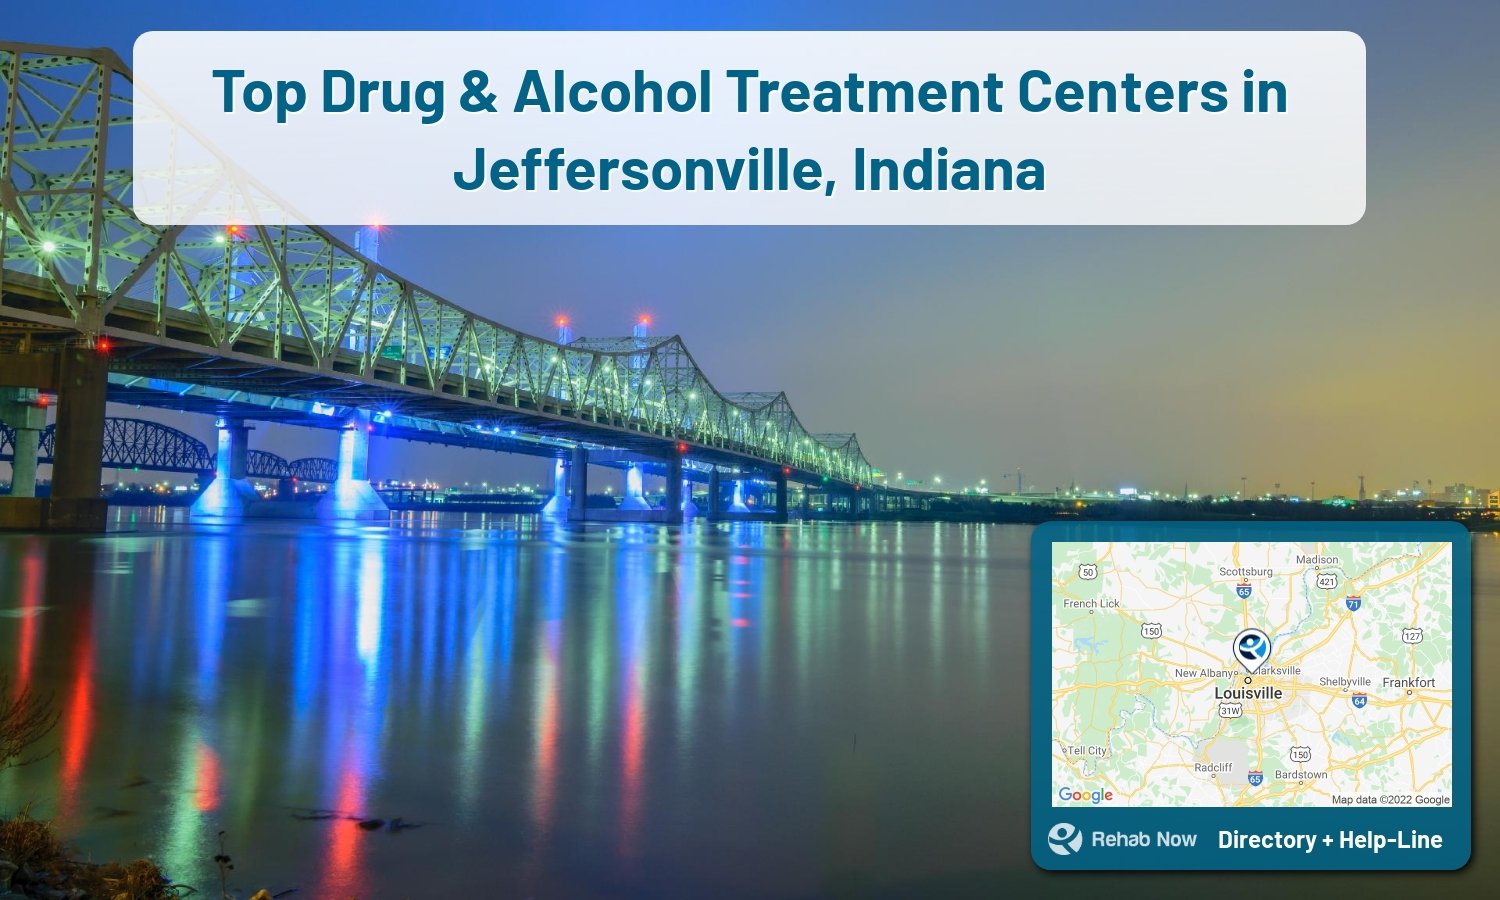 Need treatment nearby in Jeffersonville, Indiana? Choose a drug/alcohol rehab center from our list, or call our hotline now for free help.